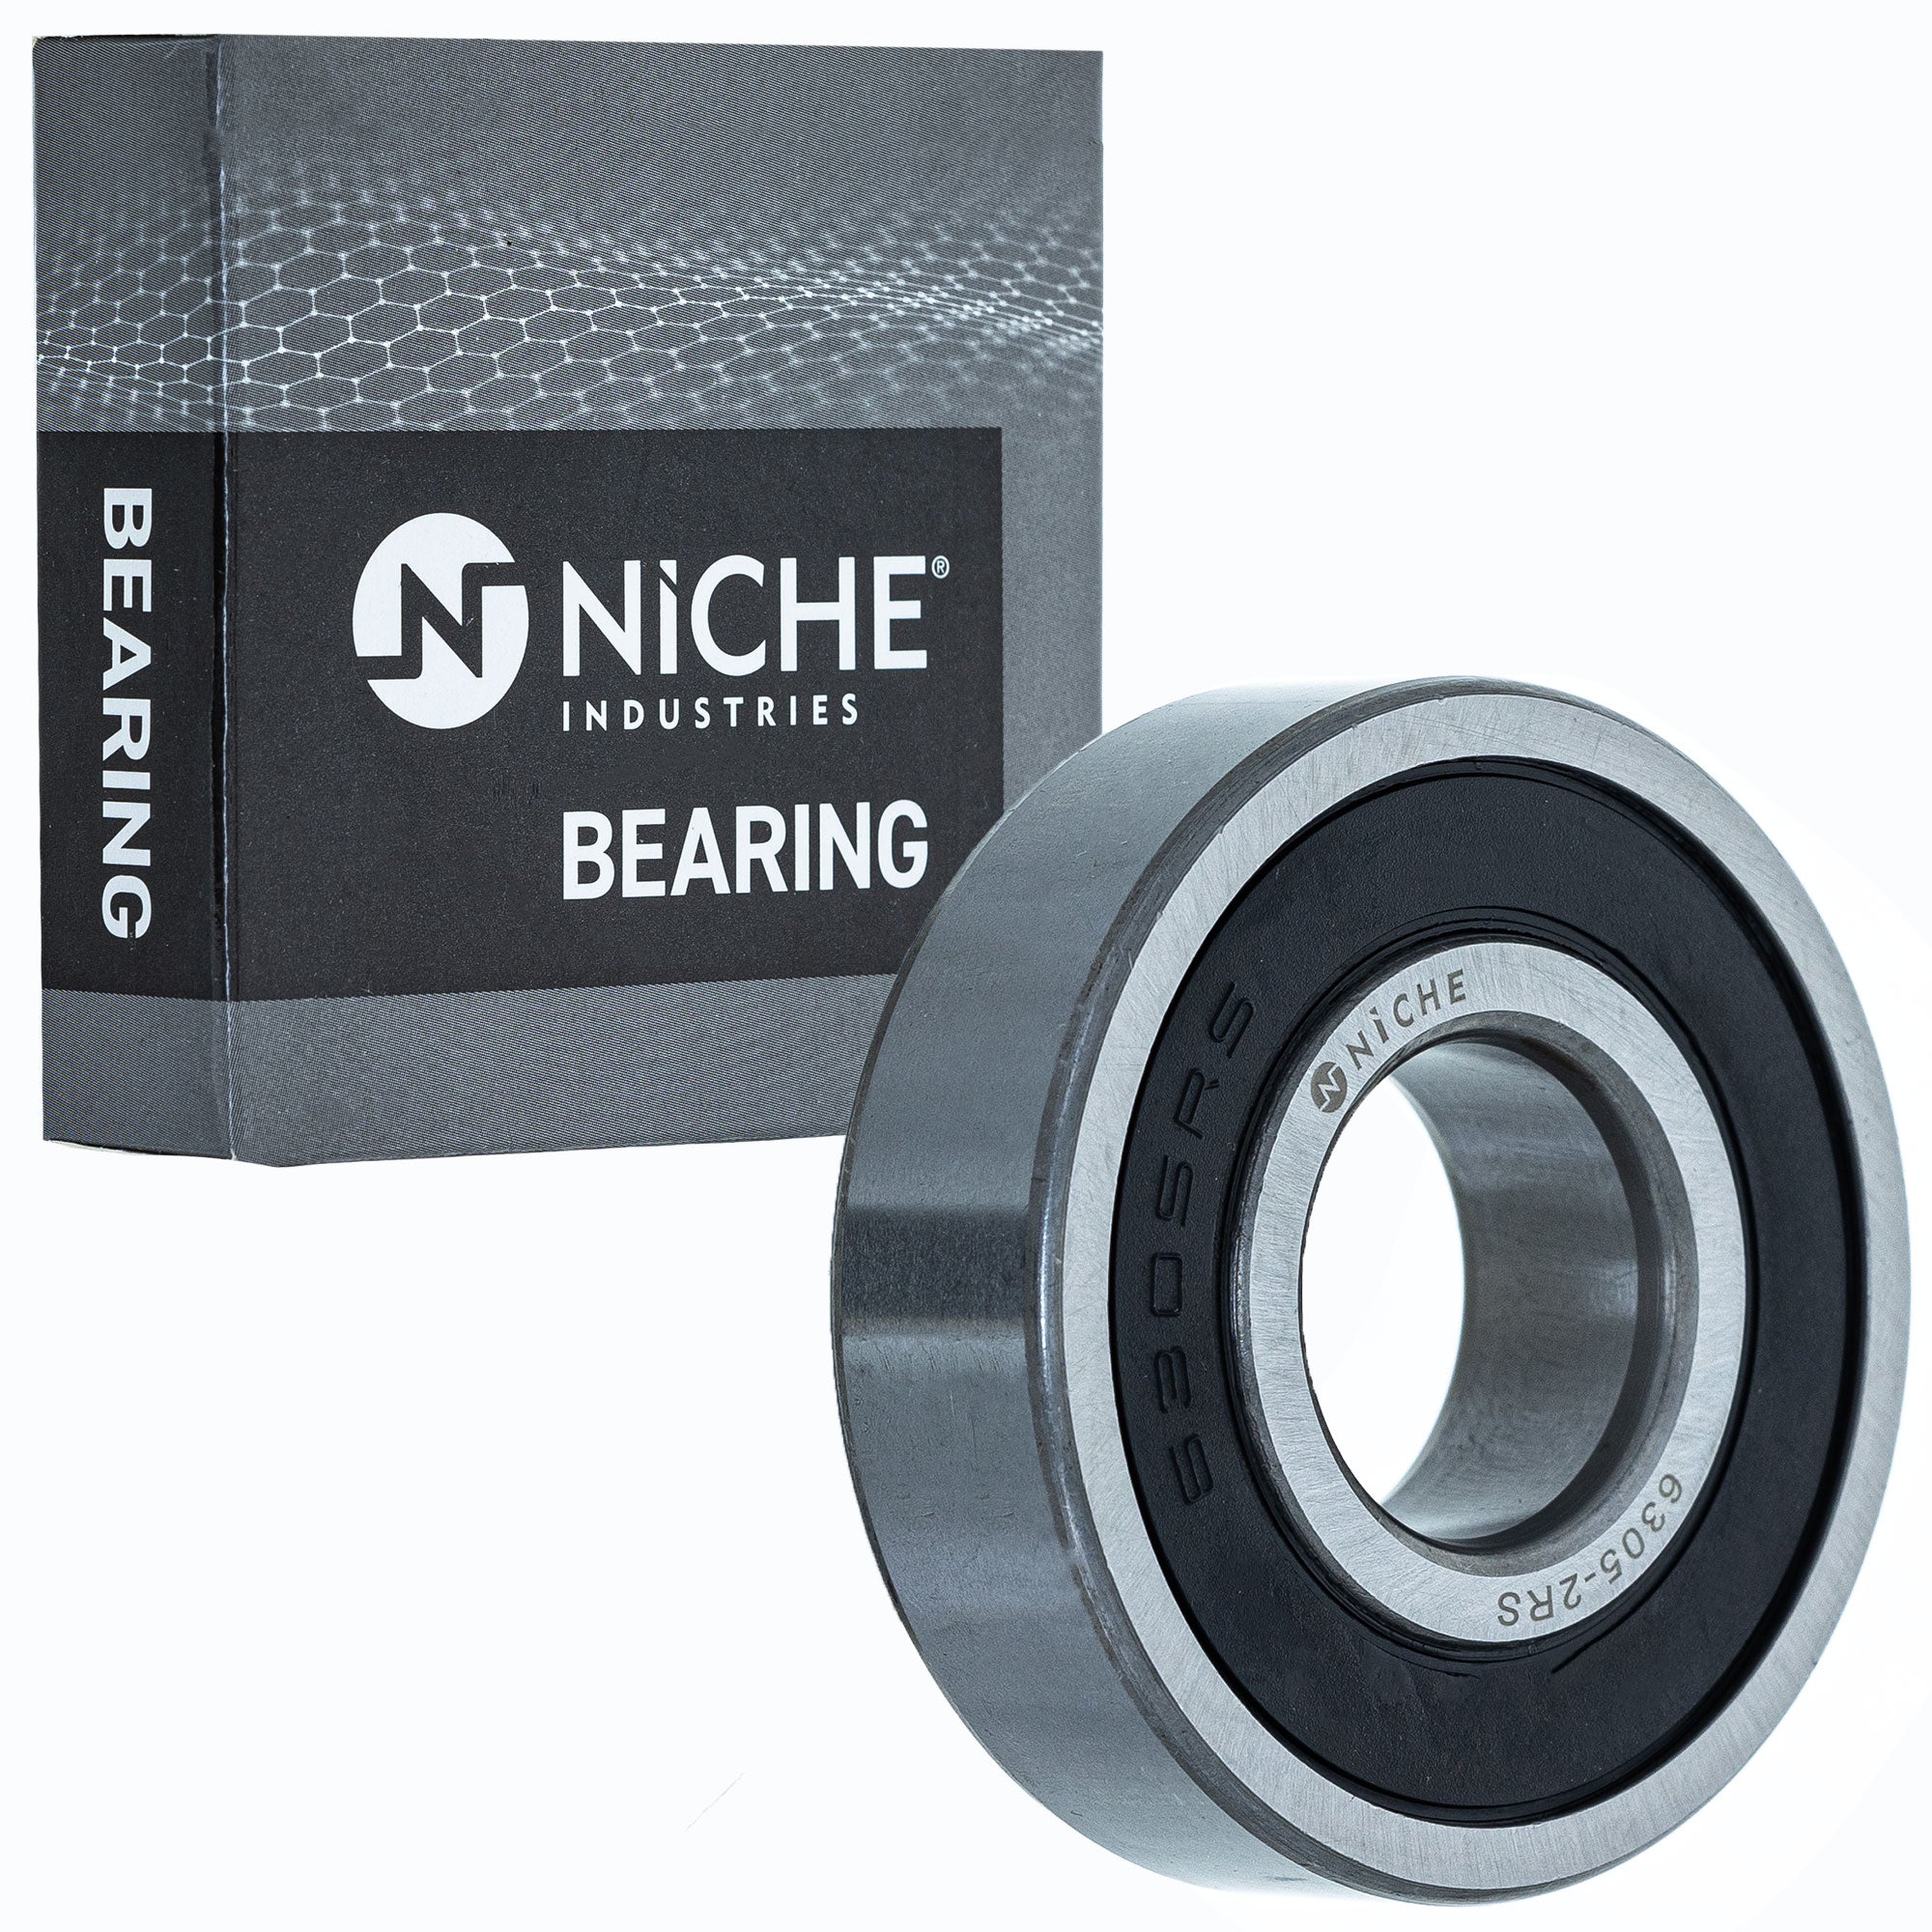 NICHE 519-CBB2231R Bearing & Seal Kit 10-Pack for zOTHER YAZOO-KEES